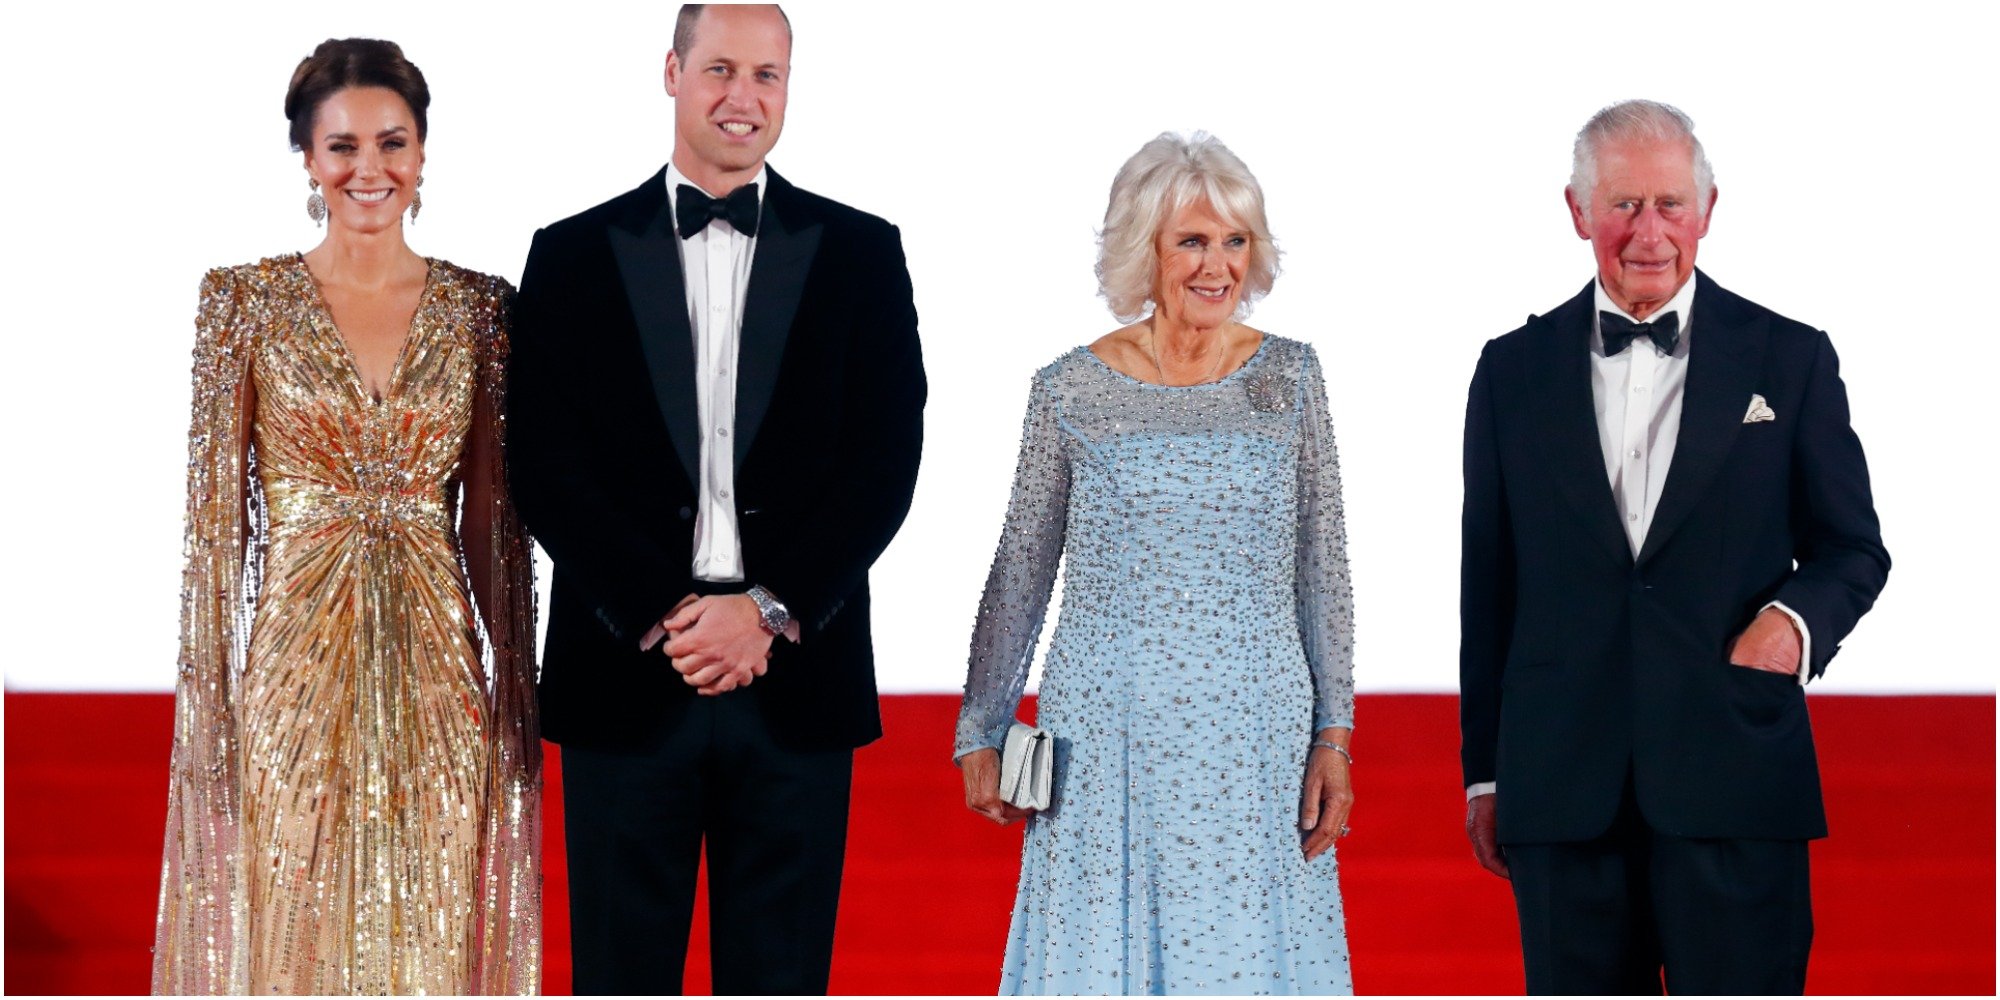 Kate Middleton, Prince William, Camilla Parker Bowles and Prince Charles